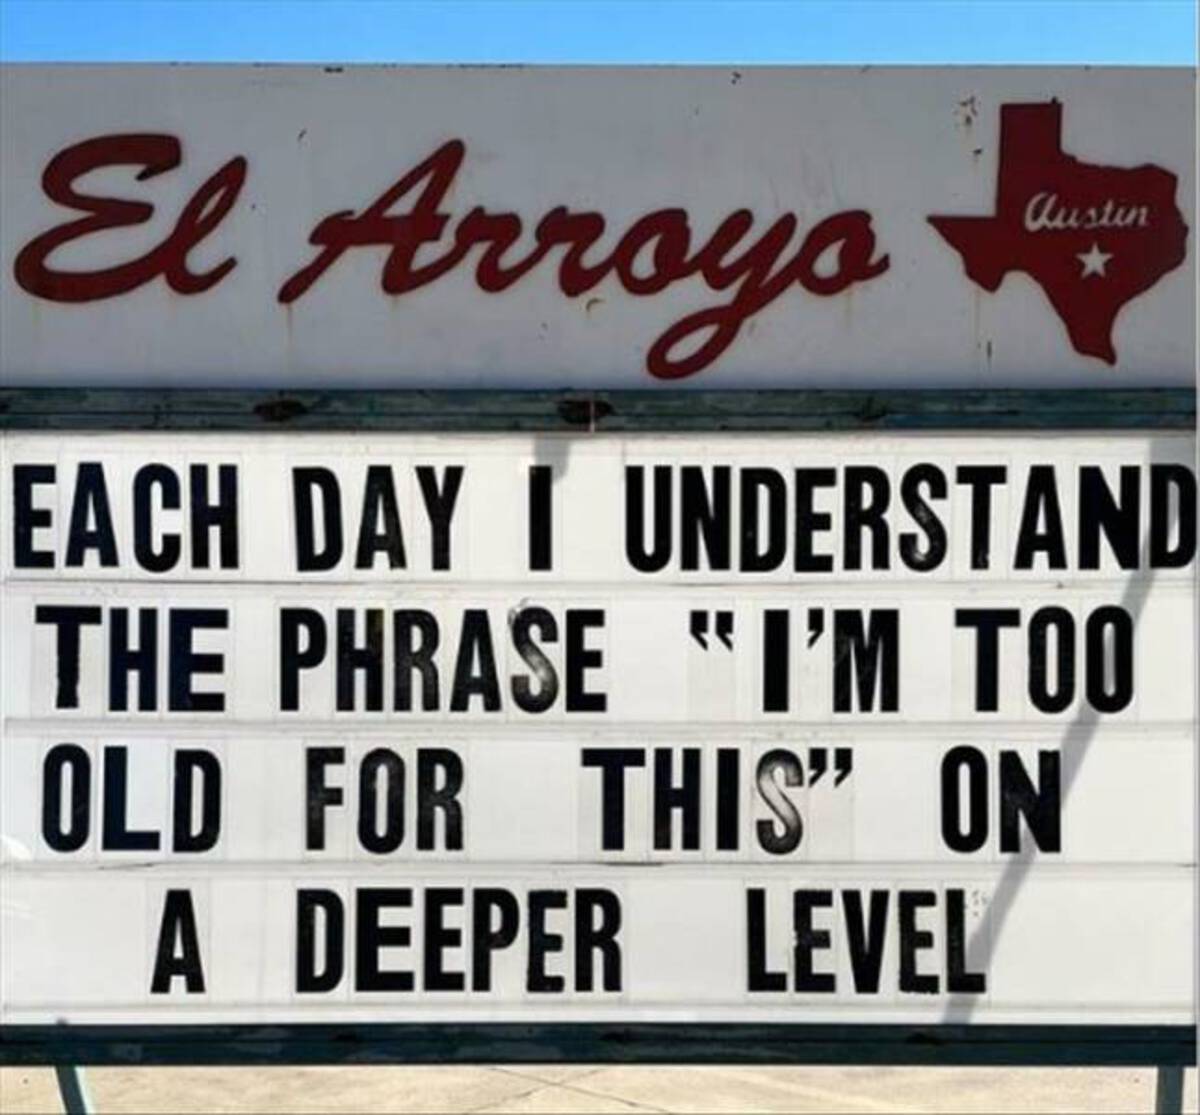 el arroyo - El Arroyo Each Day I Understand The Phrase "I'M Too Old For This" On A Deeper Level Austin